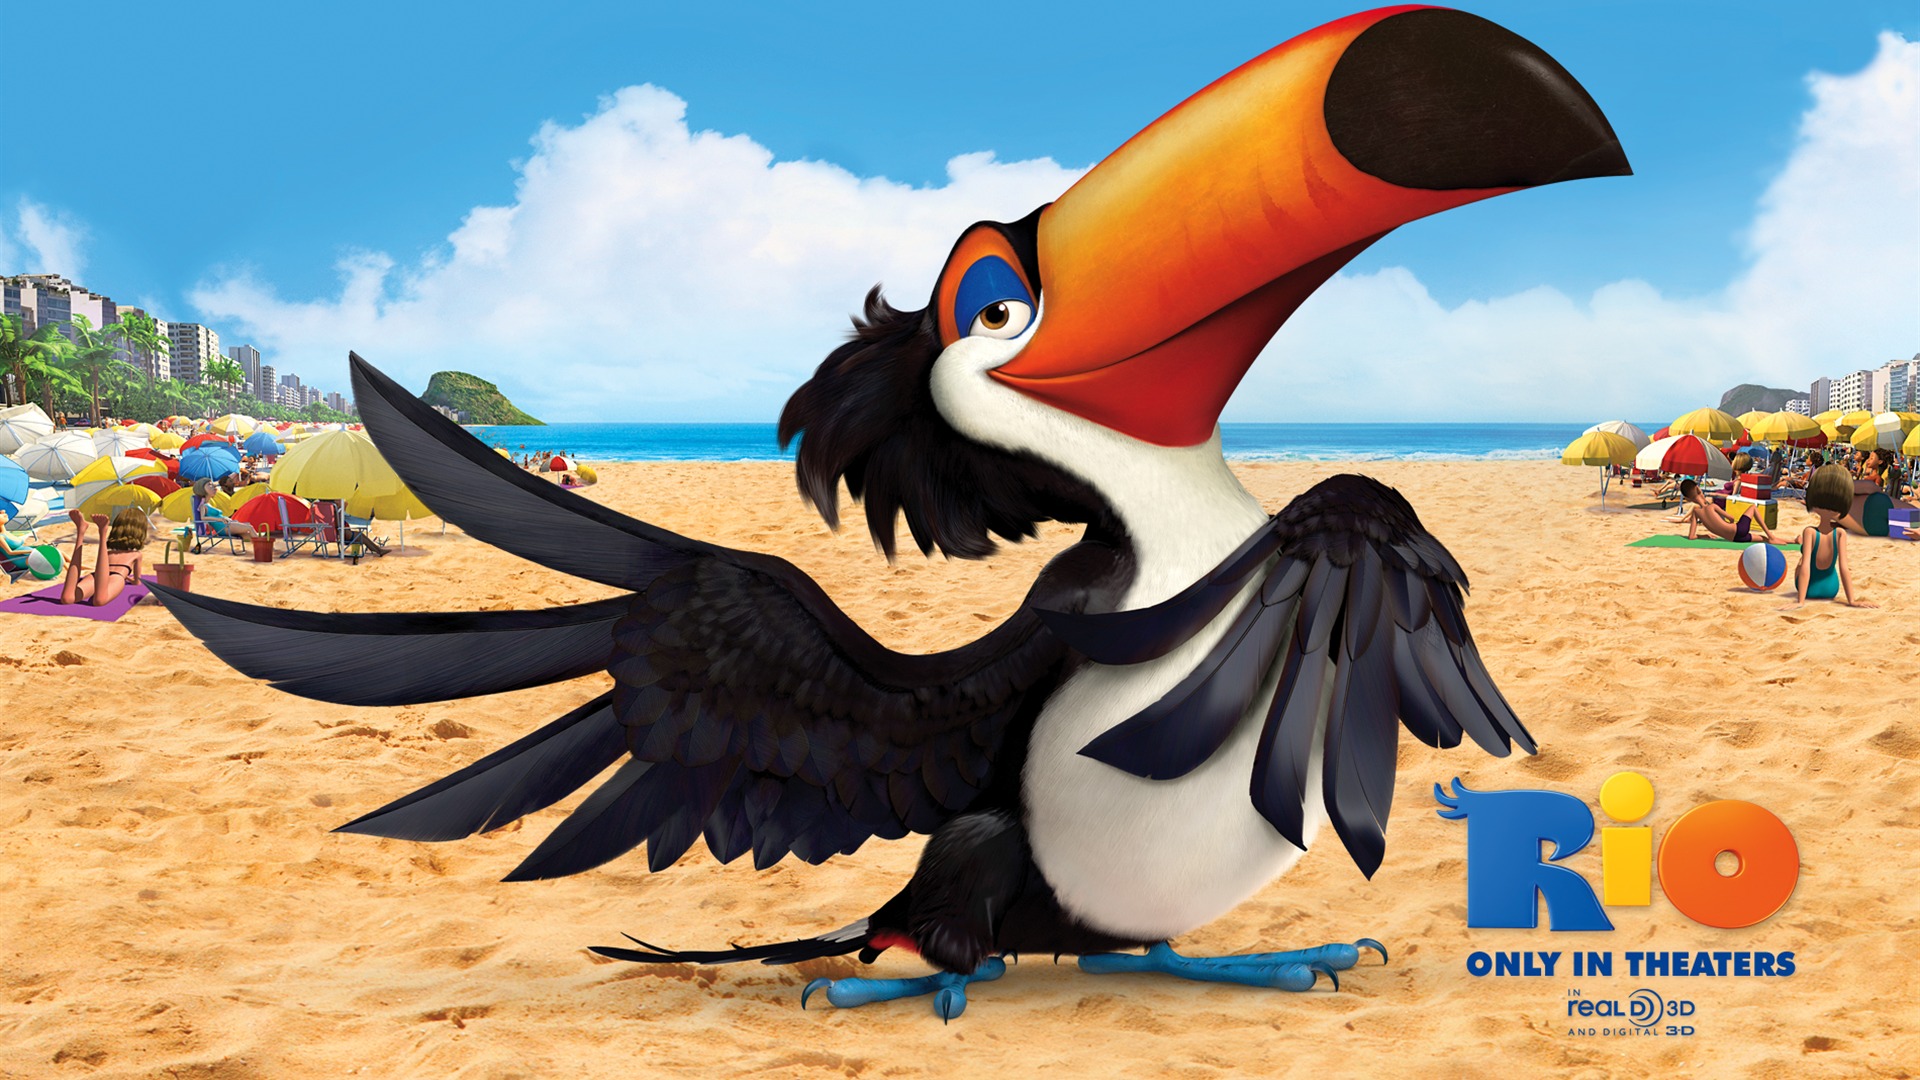 Rio 2011 wallpapers #16 - 1920x1080